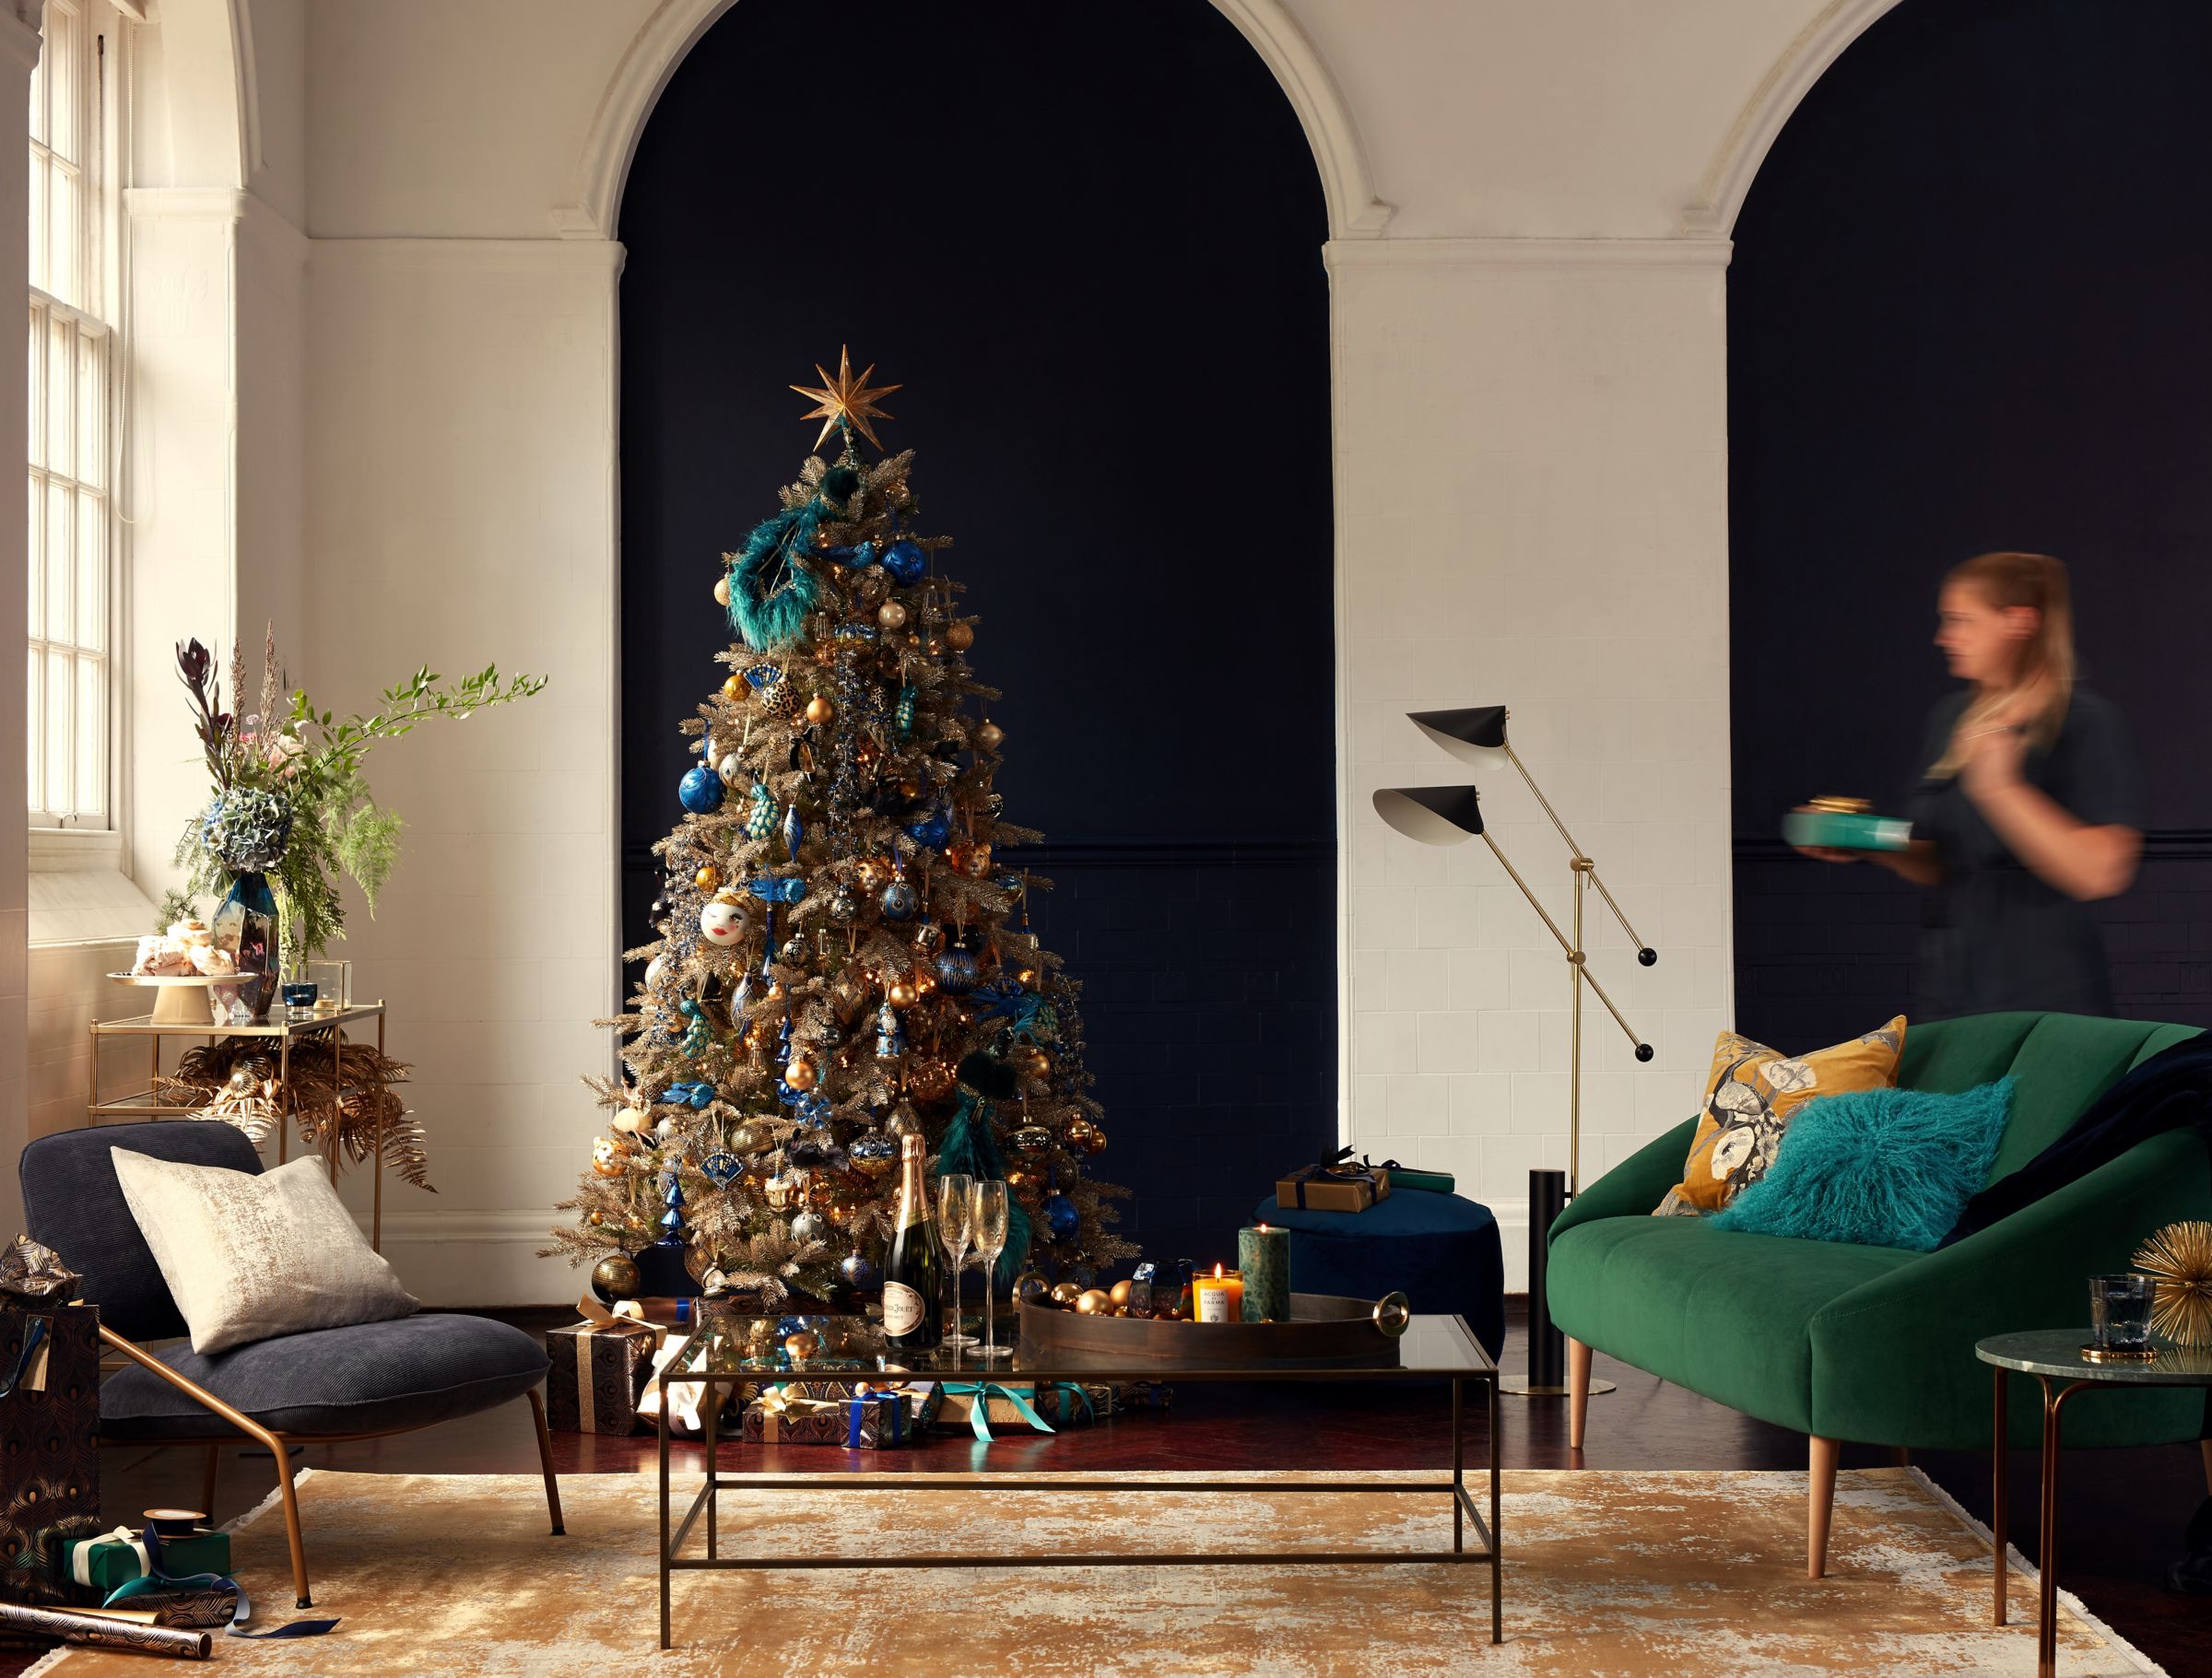 How to update your Christmas tree (without blowing the budget)